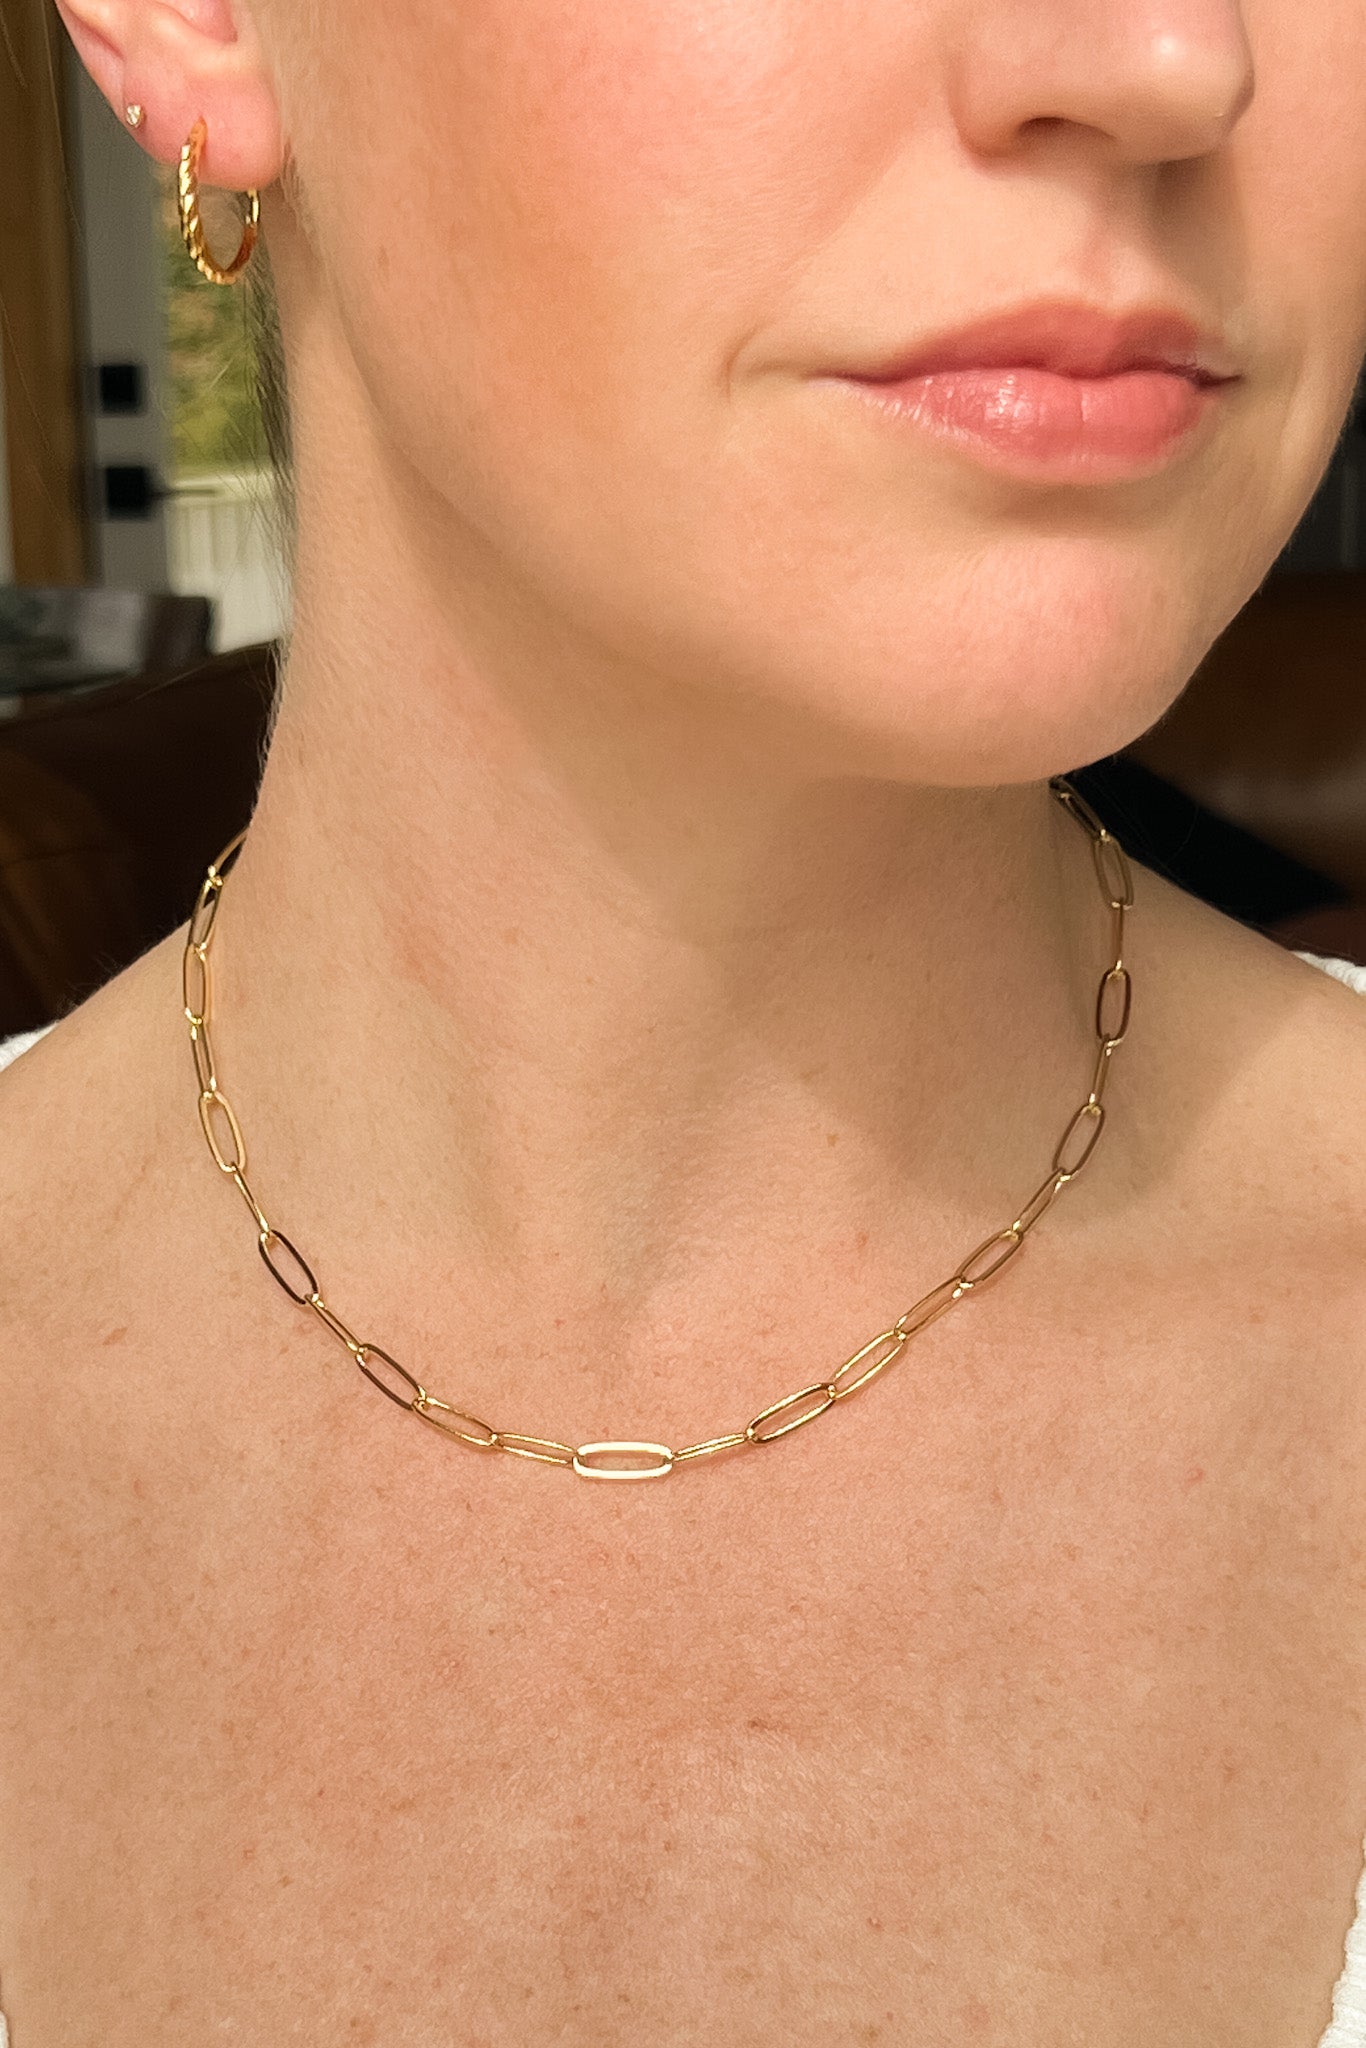 Missing Link Chain Necklace